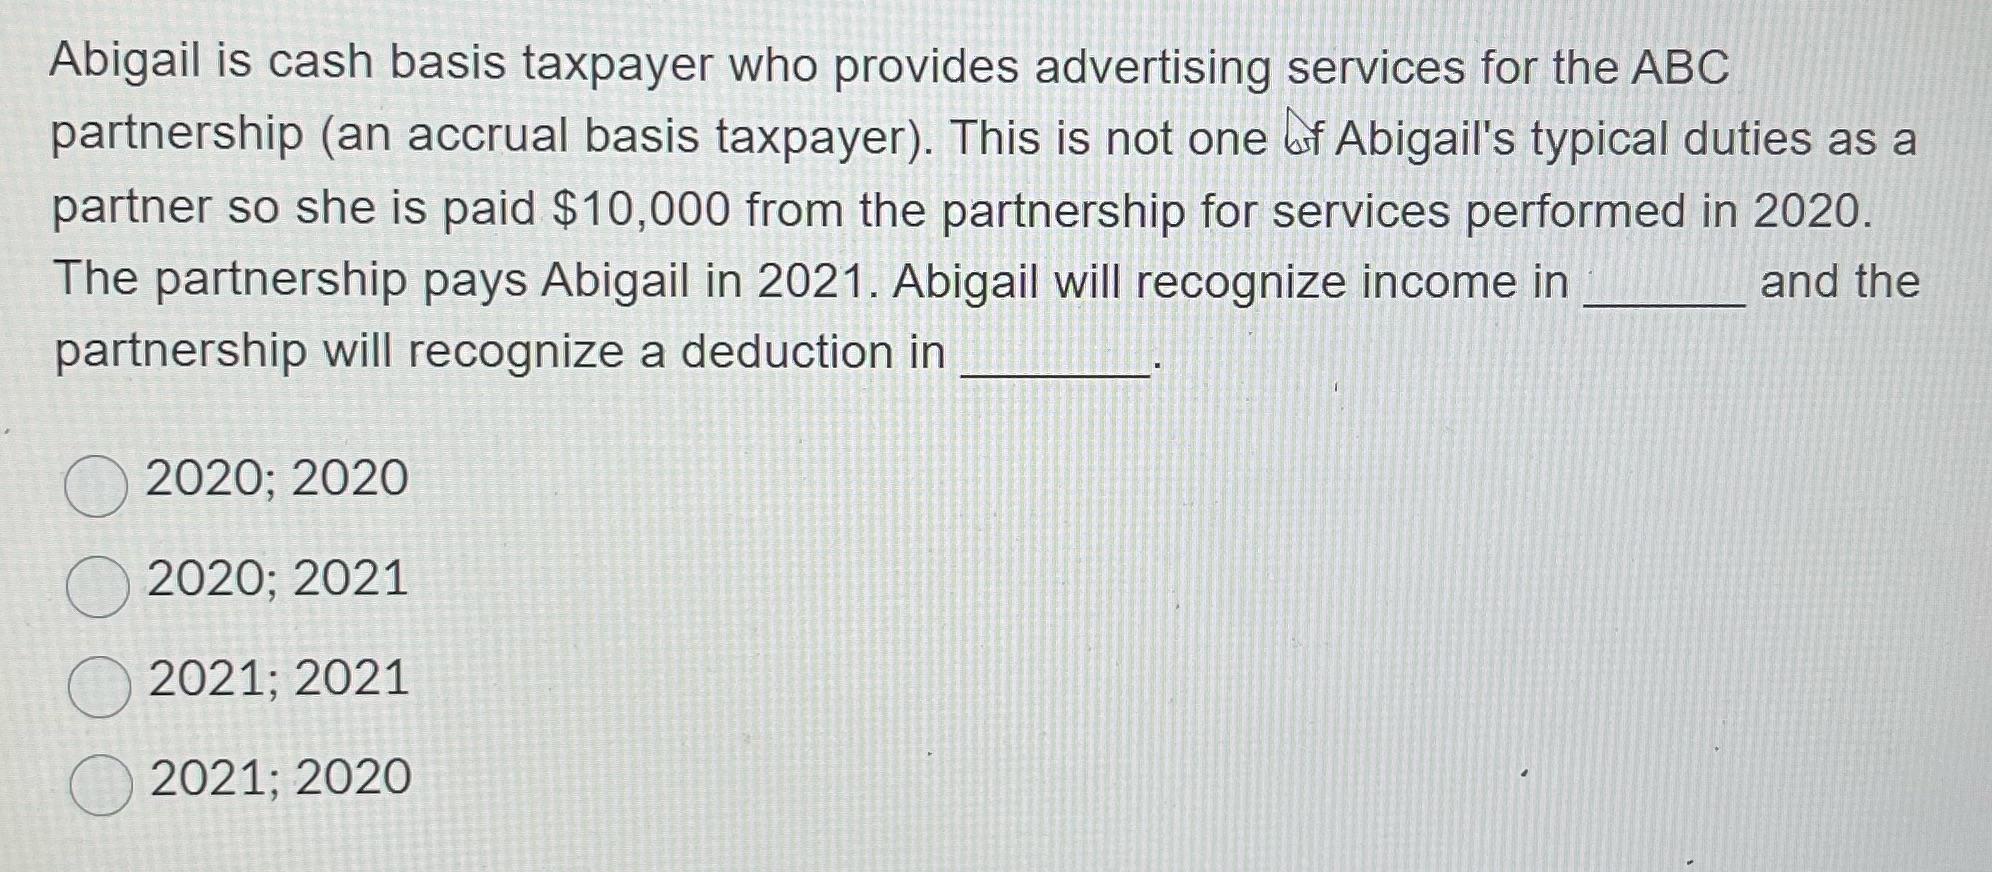 Abigail is cash basis taxpayer who provides advertising services for the ABC partnership (an accrual basis